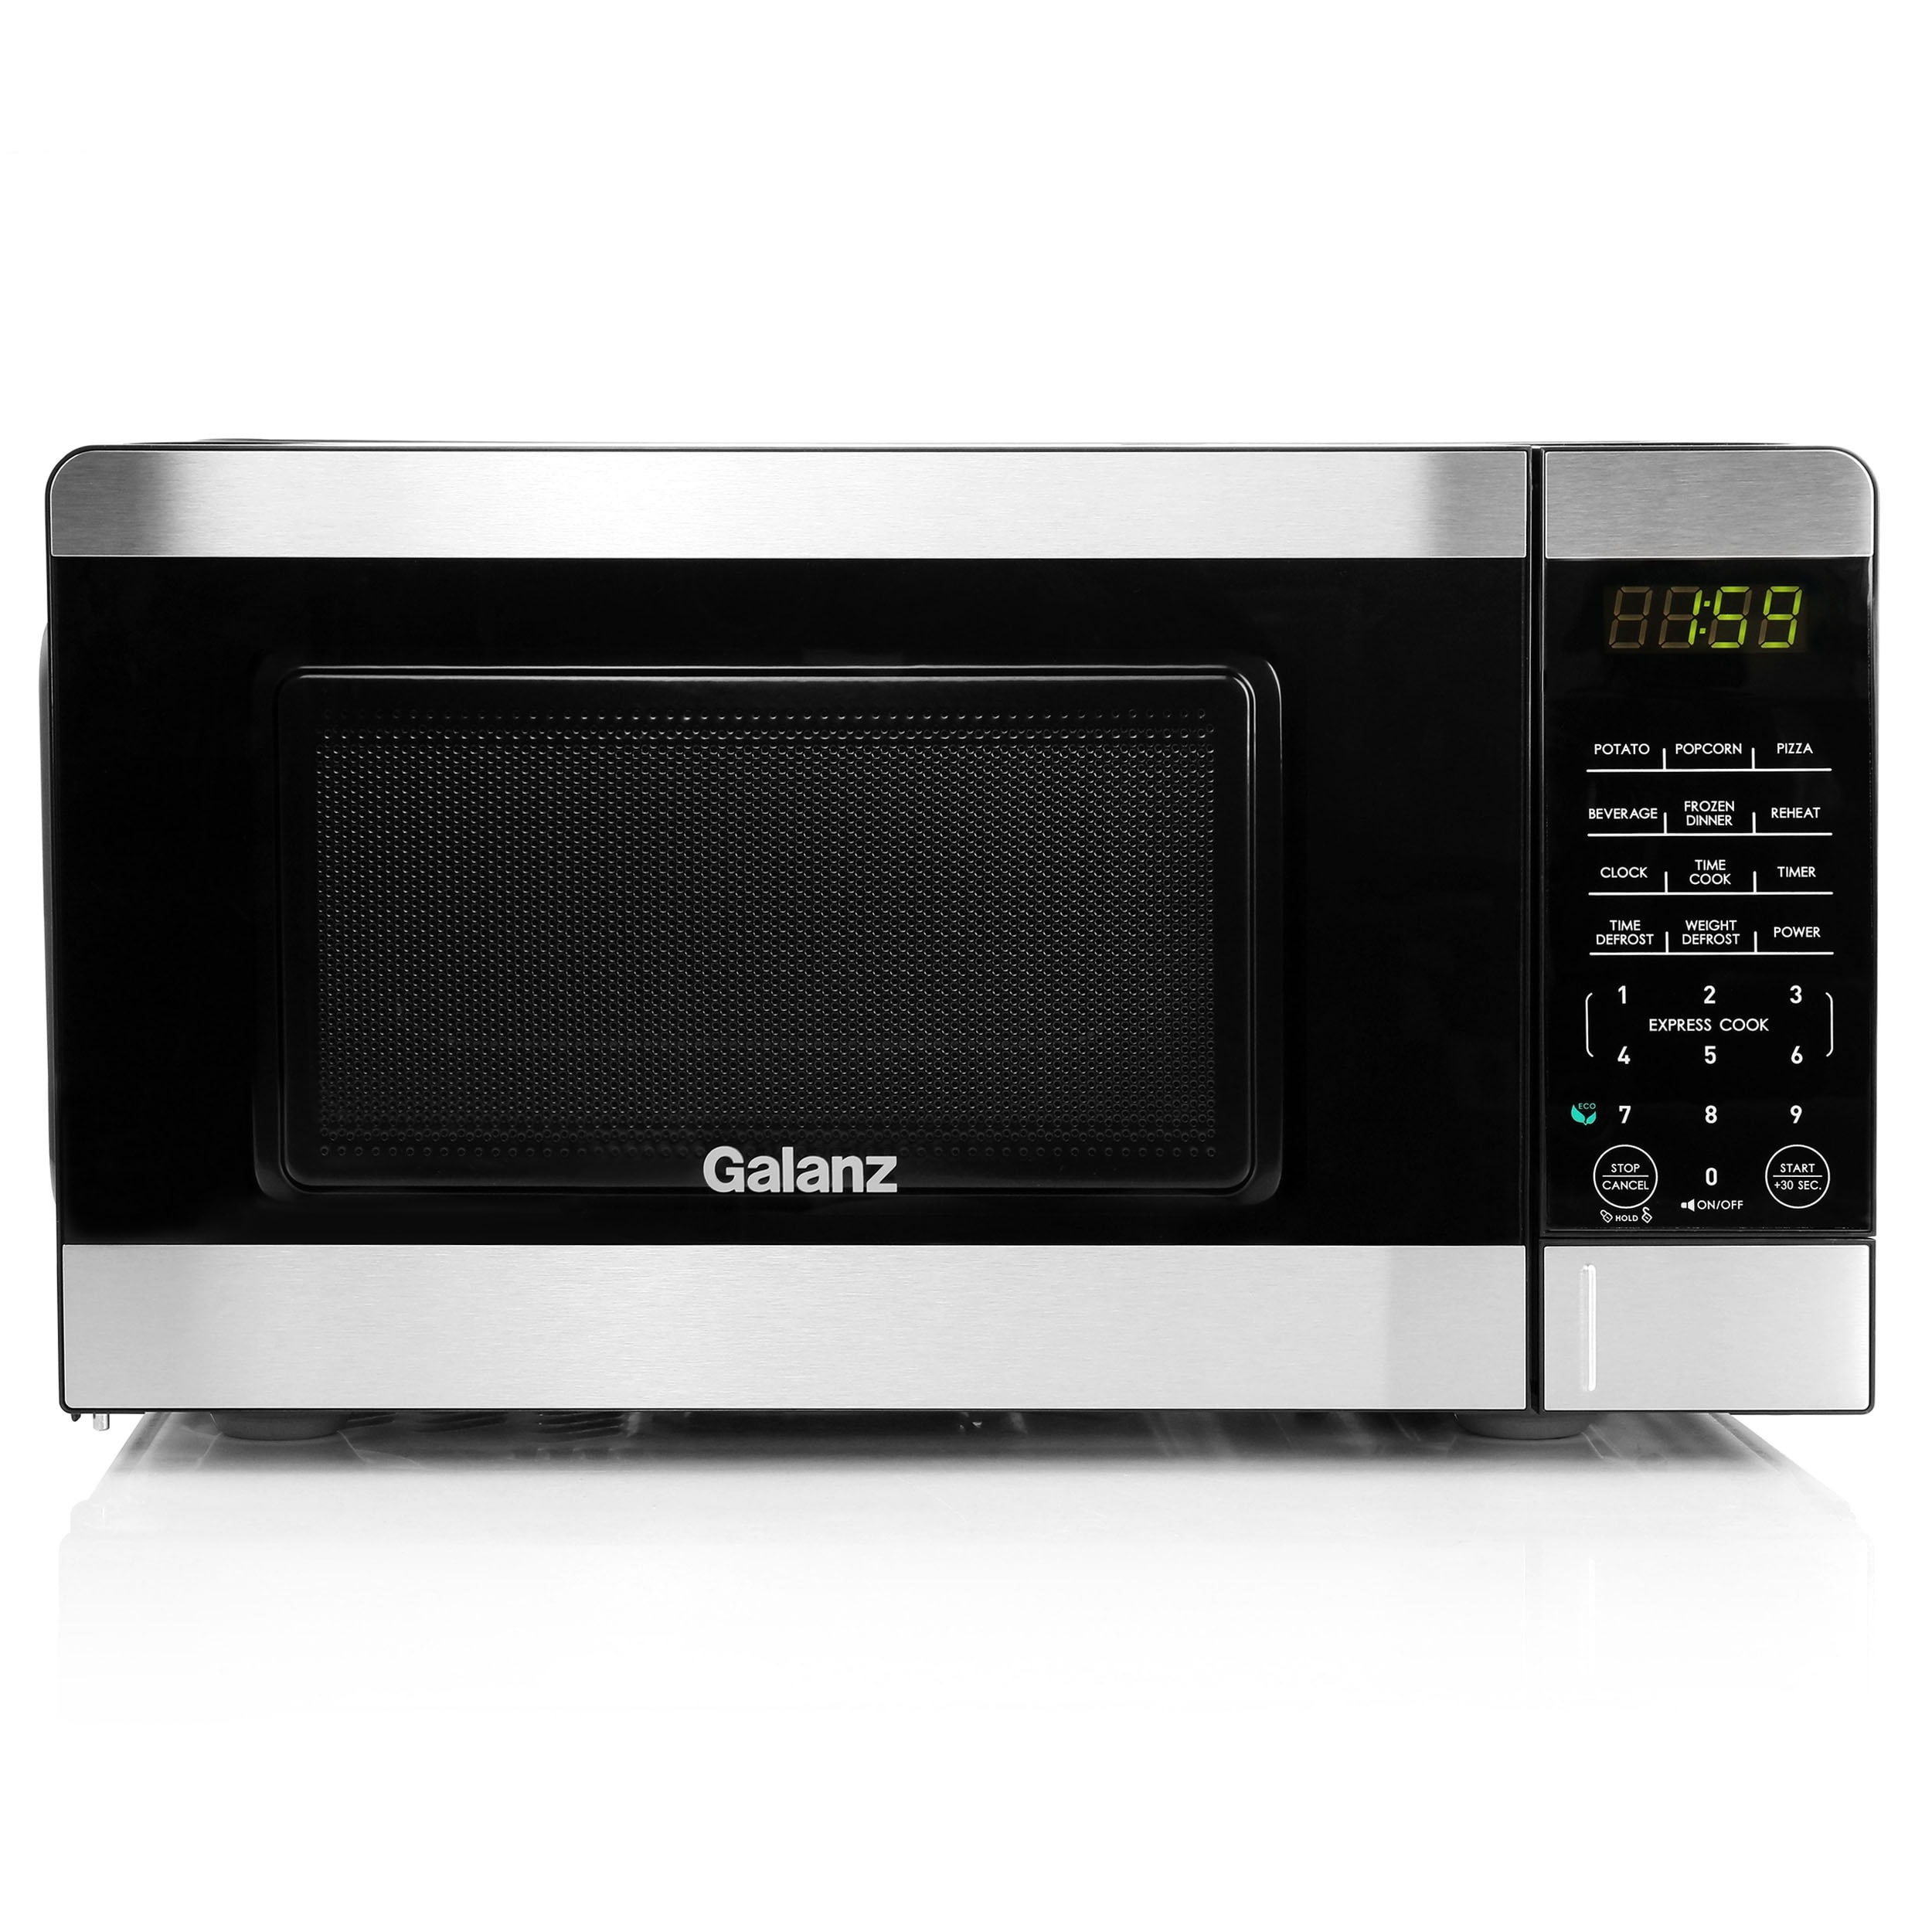 https://ak1.ostkcdn.com/images/products/is/images/direct/bb41e2ac100d90cd16e4493276d9cdcc721d7b8b/0.7-Cu.-Ft.-700-Watt-Countertop-Microwave-Oven-in-Silver.jpg